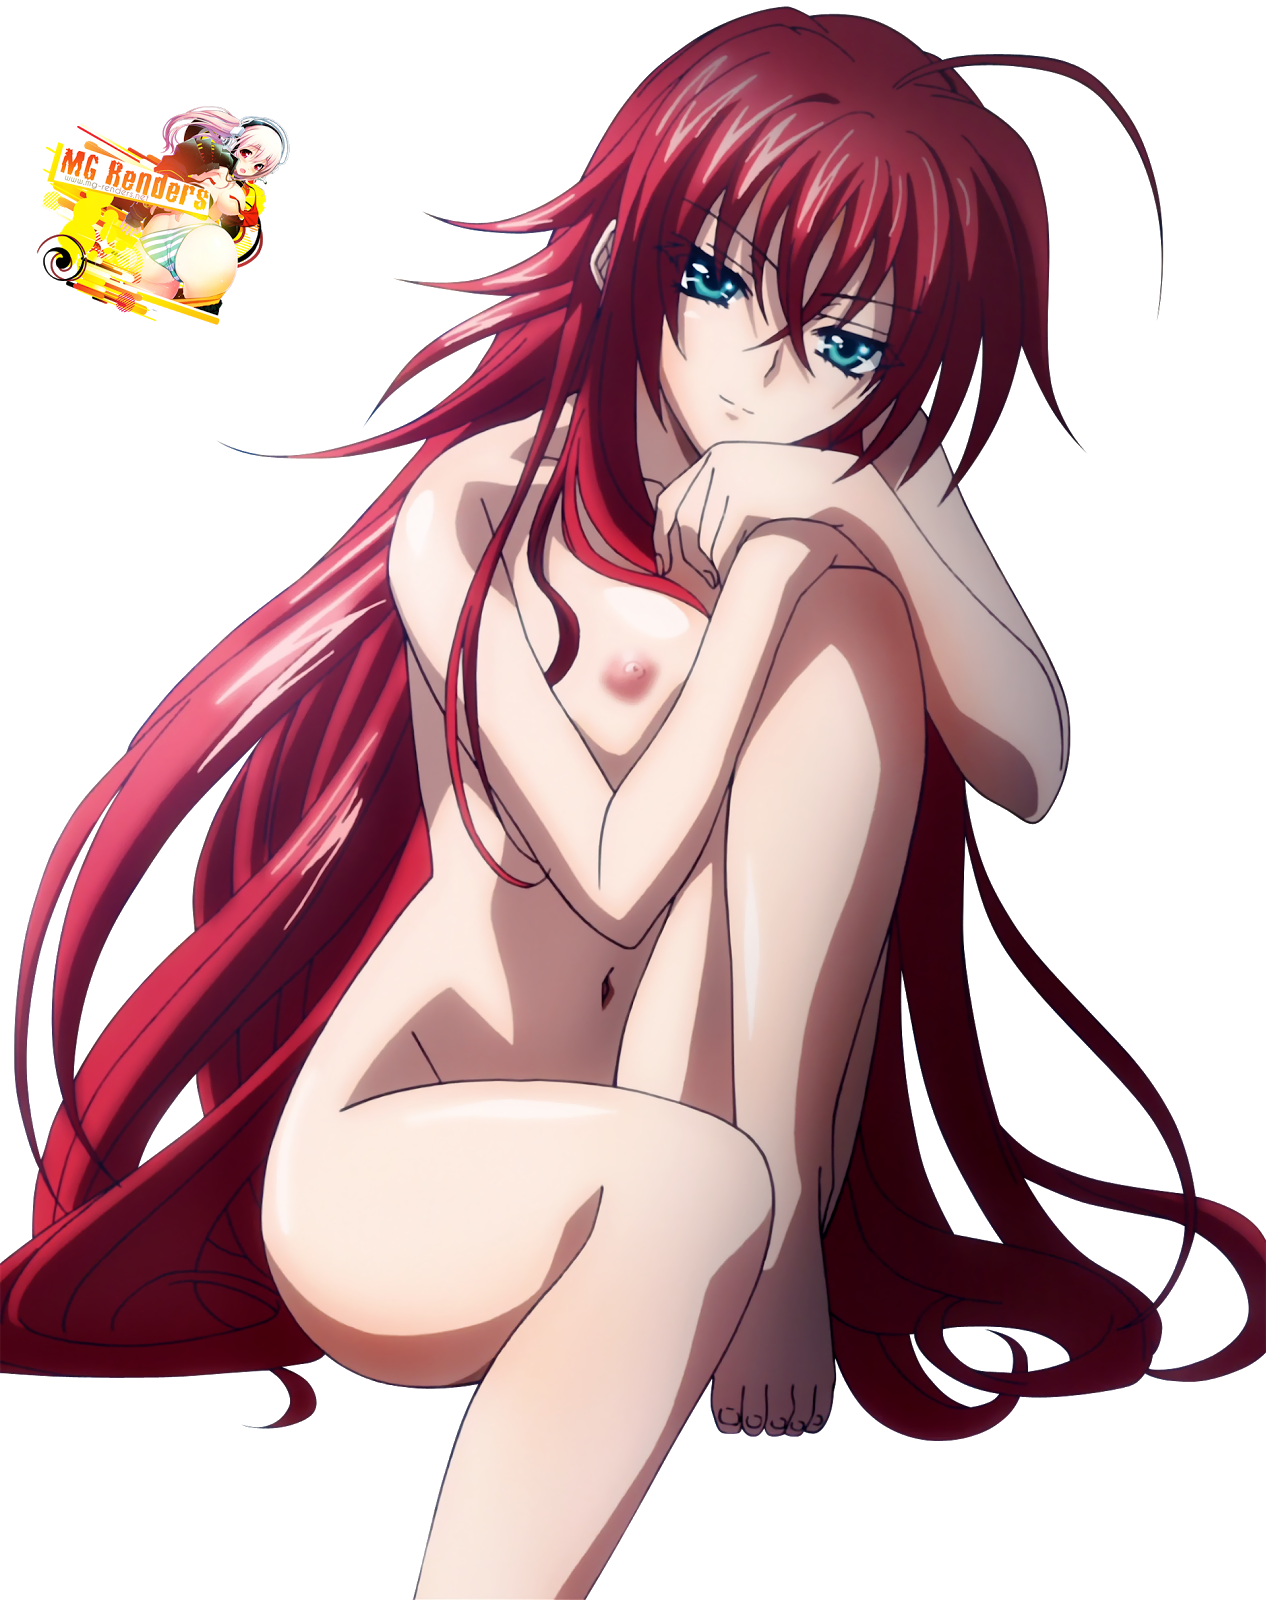 Rias gremory nudes - 🧡 Rias Gremory - Highschool DxD - Mobile Wallpaper #1...